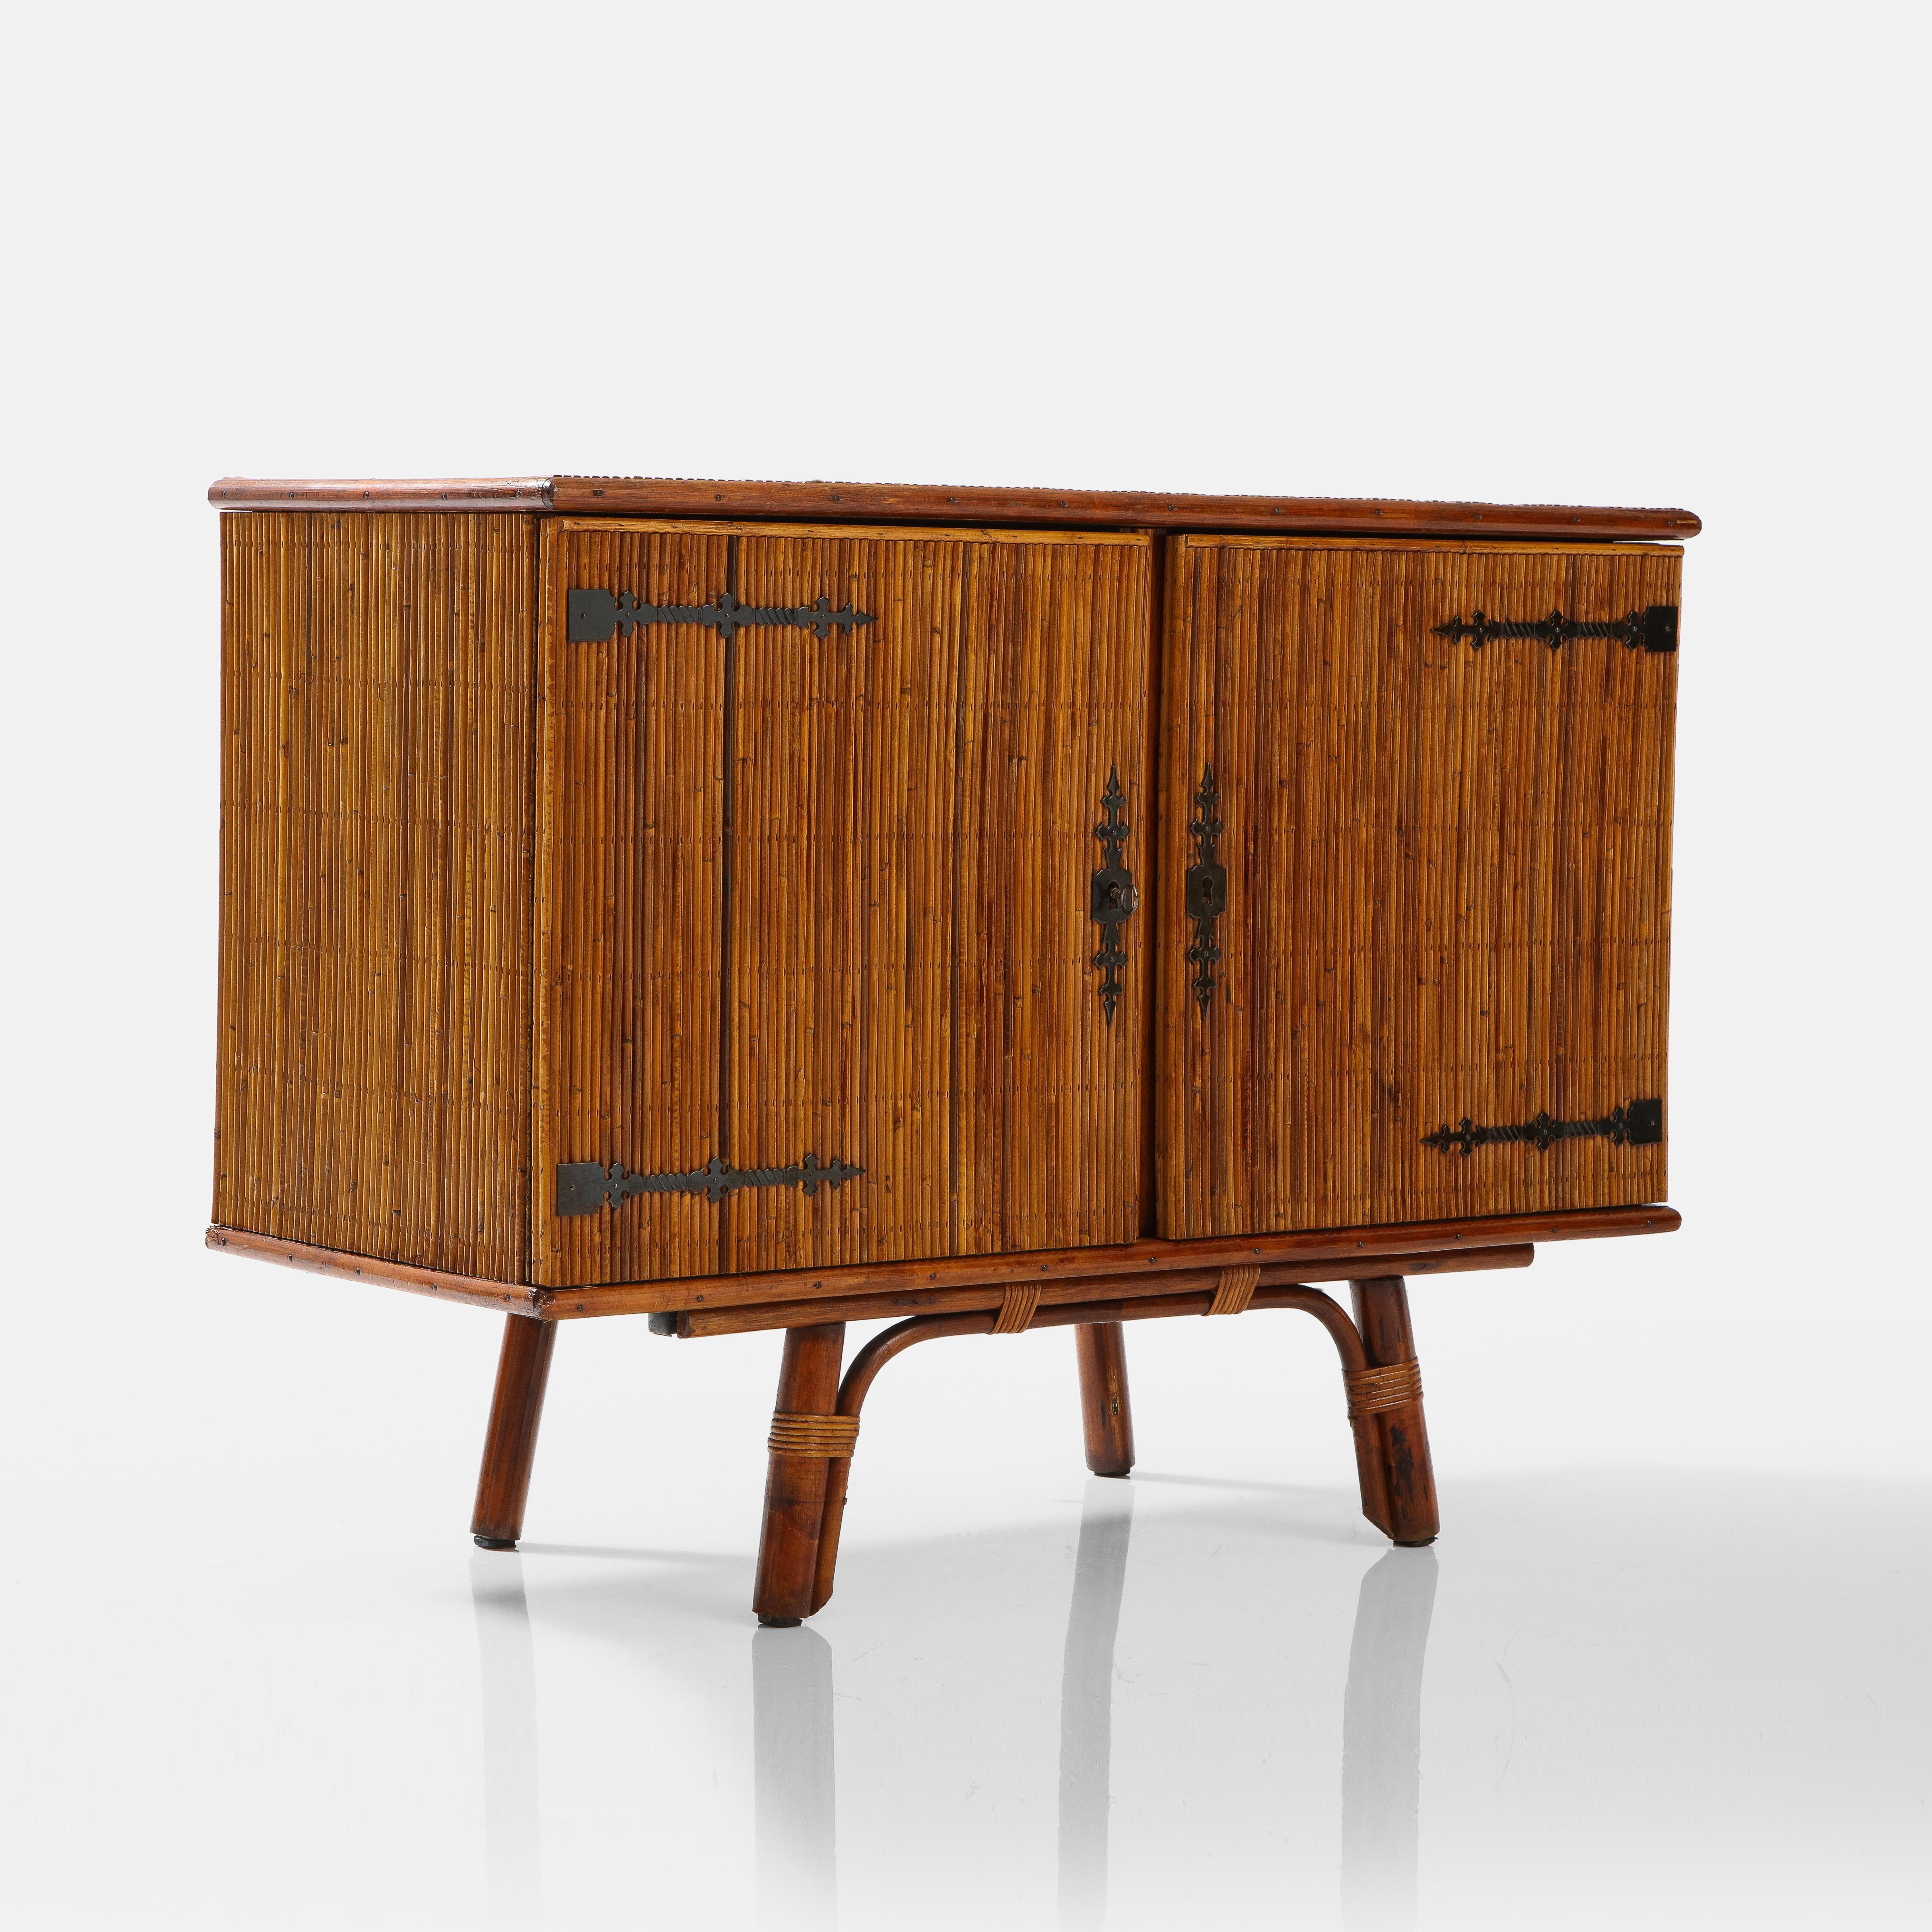 Mid-20th Century Adrien Audoux and Frida Minet Rare Bamboo Cabinet, France, 1950s